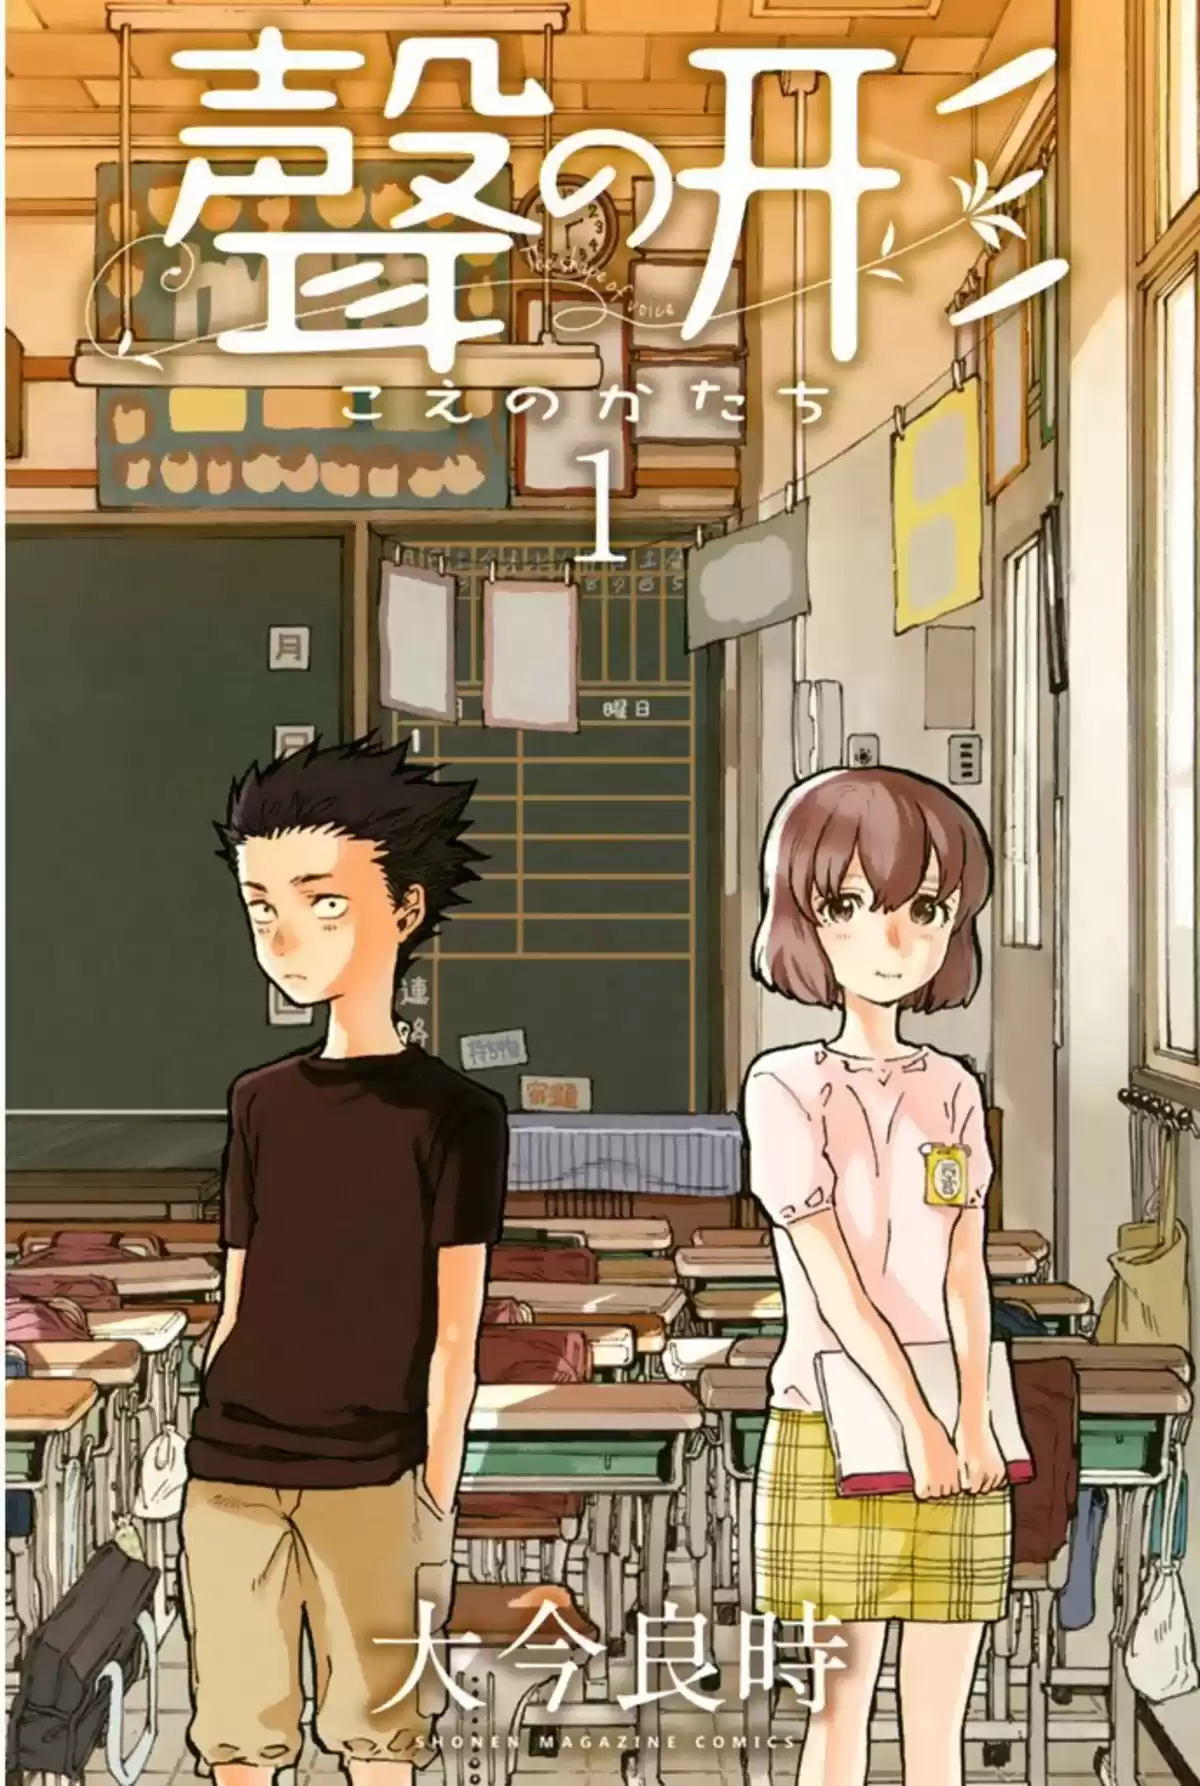 A Silent Voice Volume 1 page 1